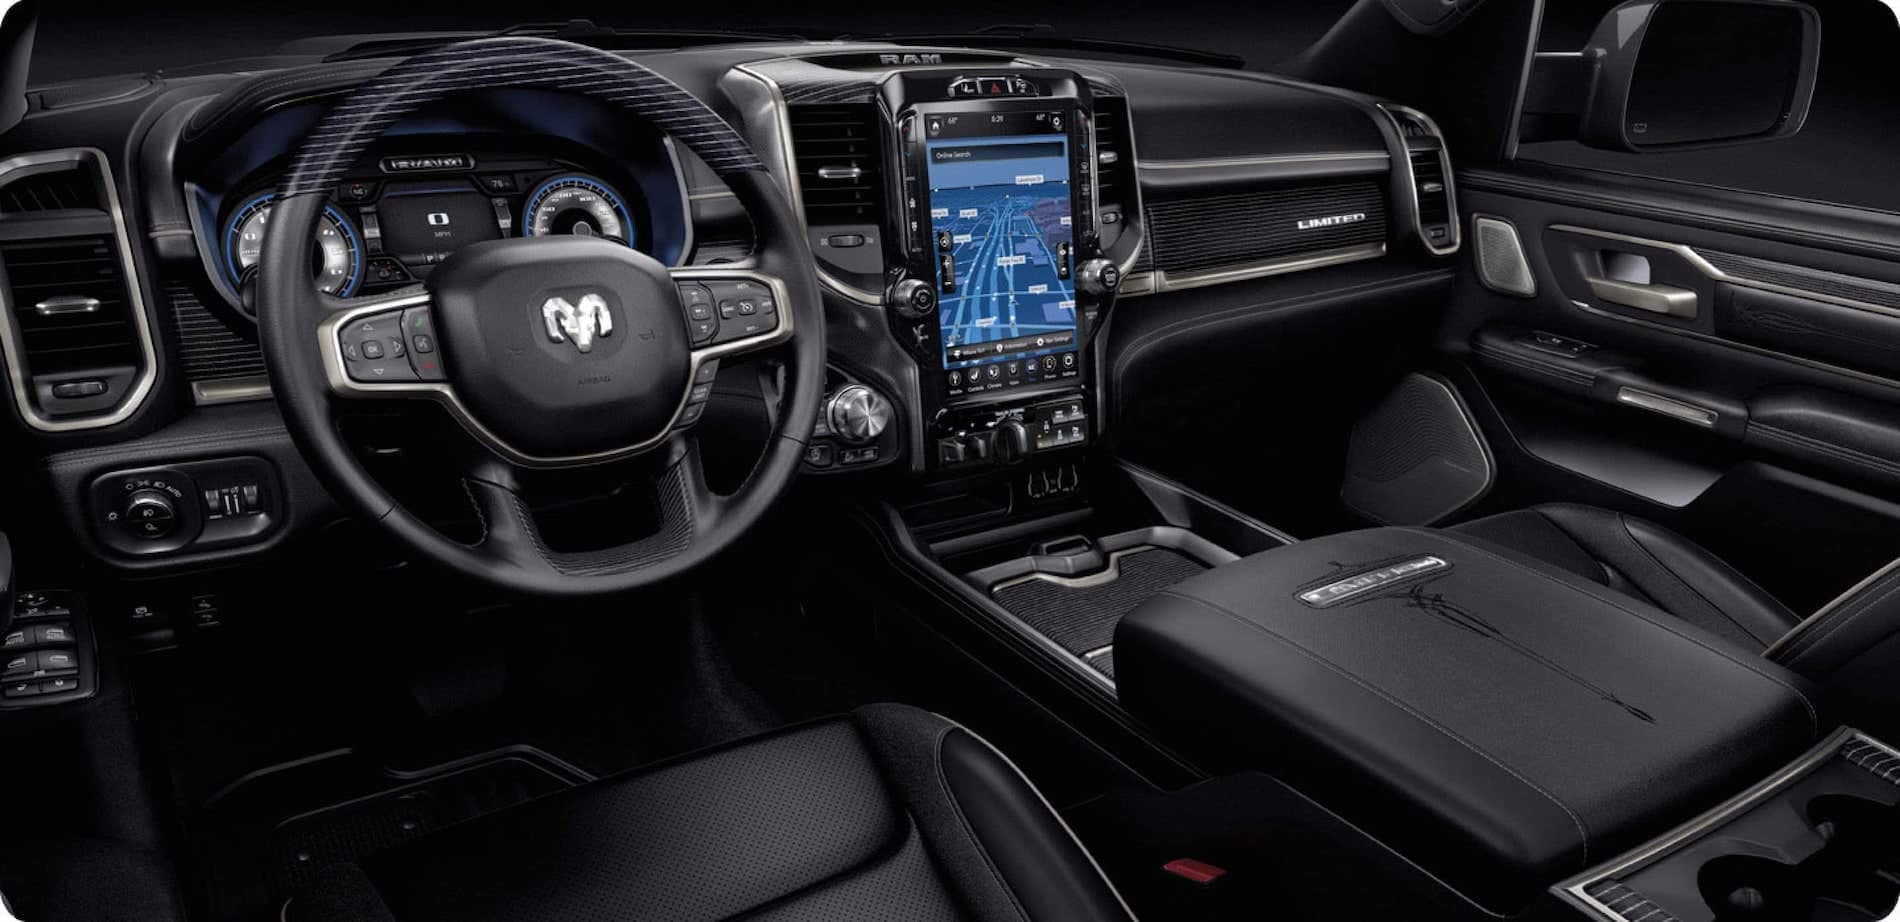 2021 Ram 1500 Interior Infotainment System available in Sterling, VA